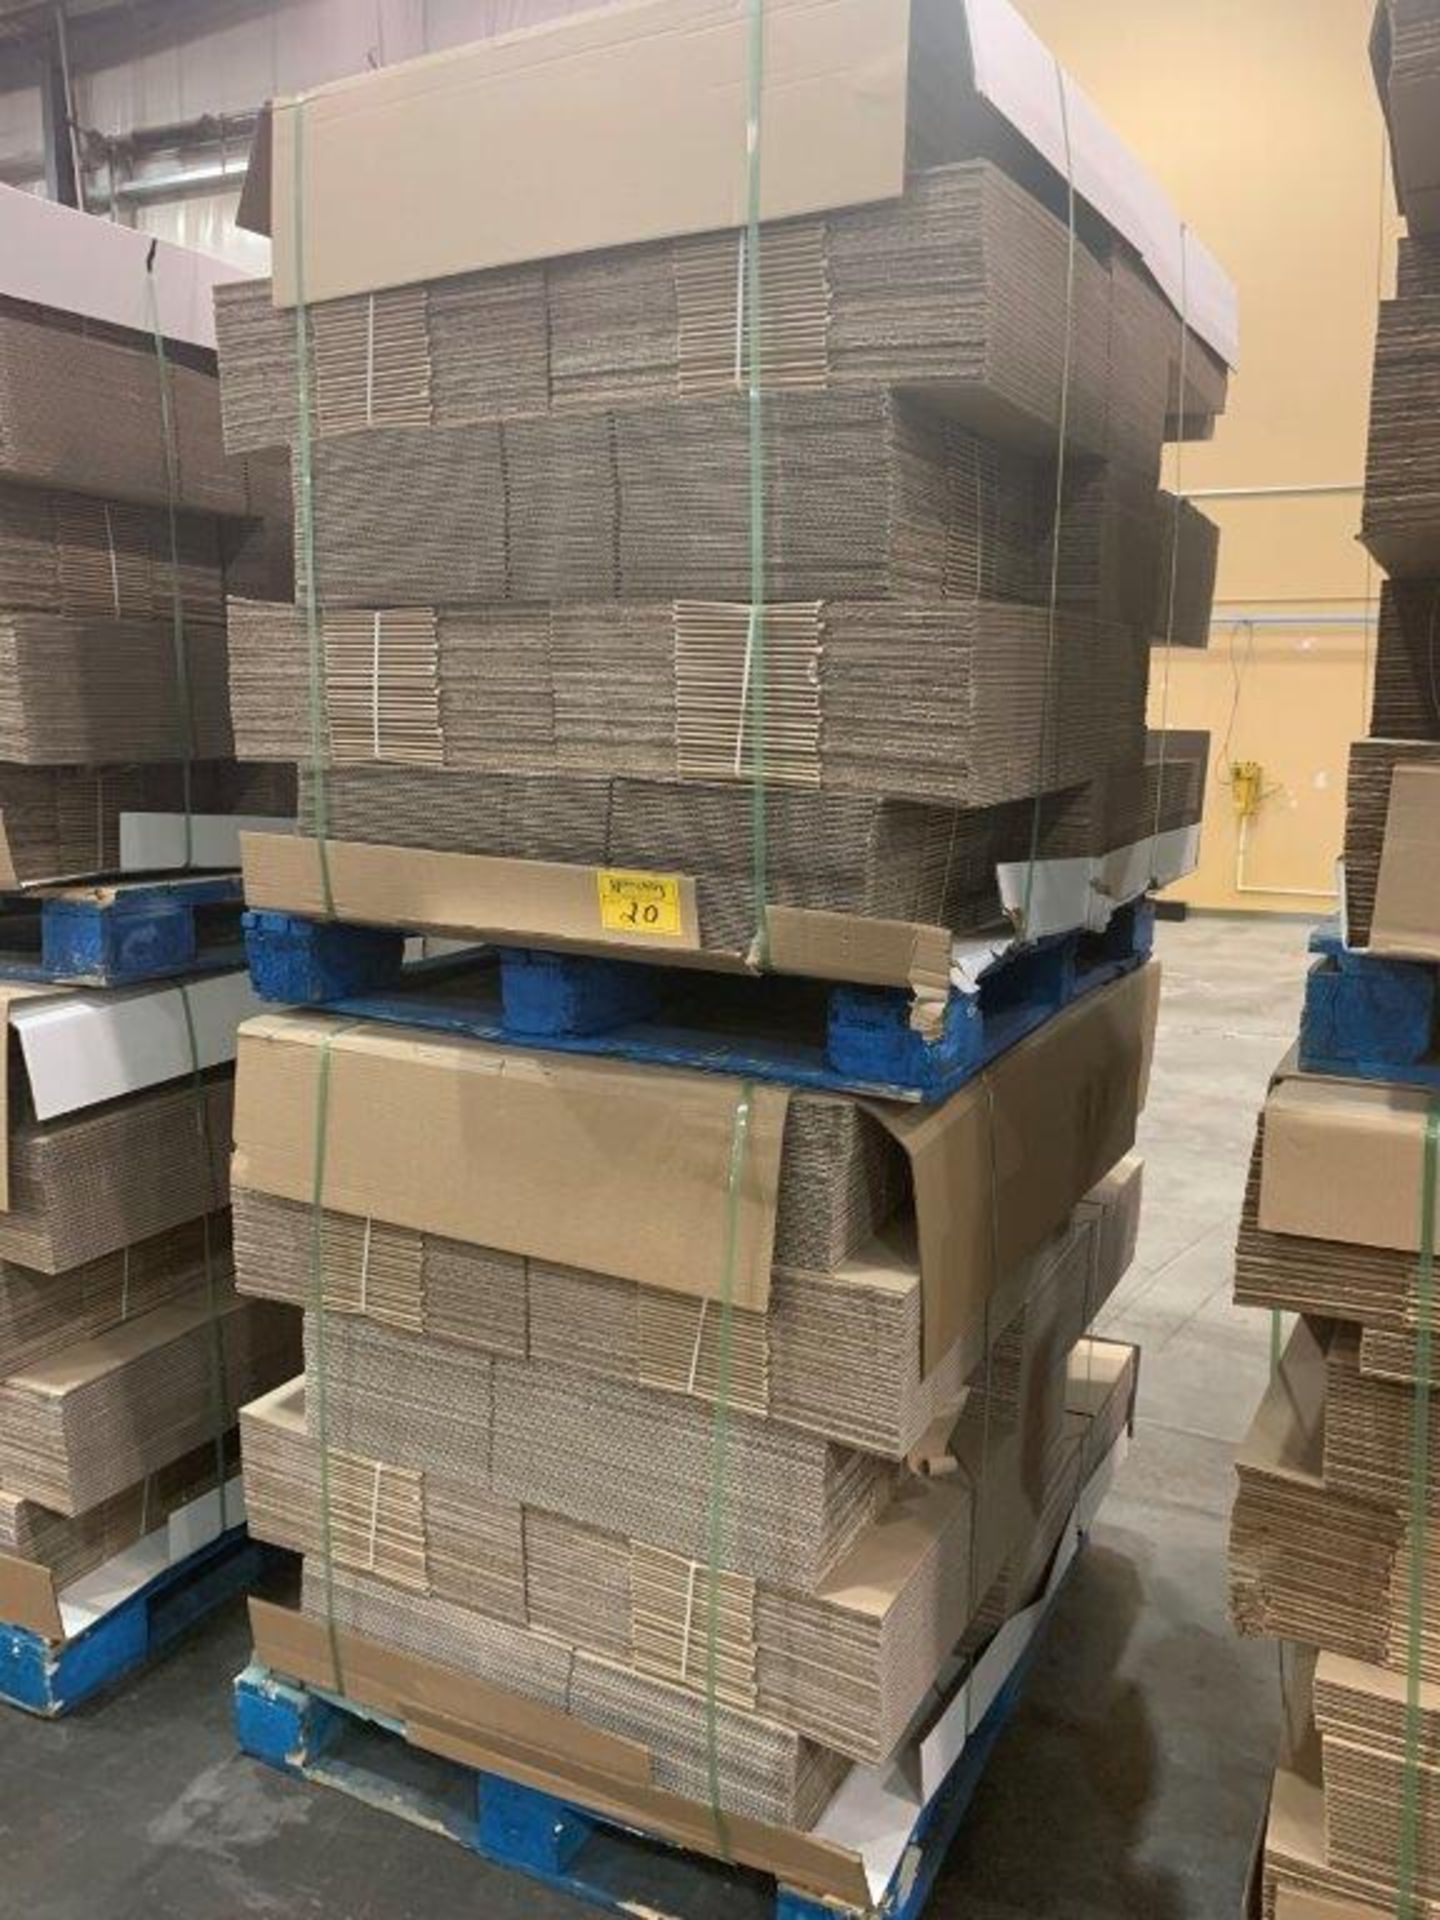 2-PALLETS PF0014 CORRIGATED CARDBOARD BOXES 375X2 750 BOXES APPROX 18X13X7 INCHES